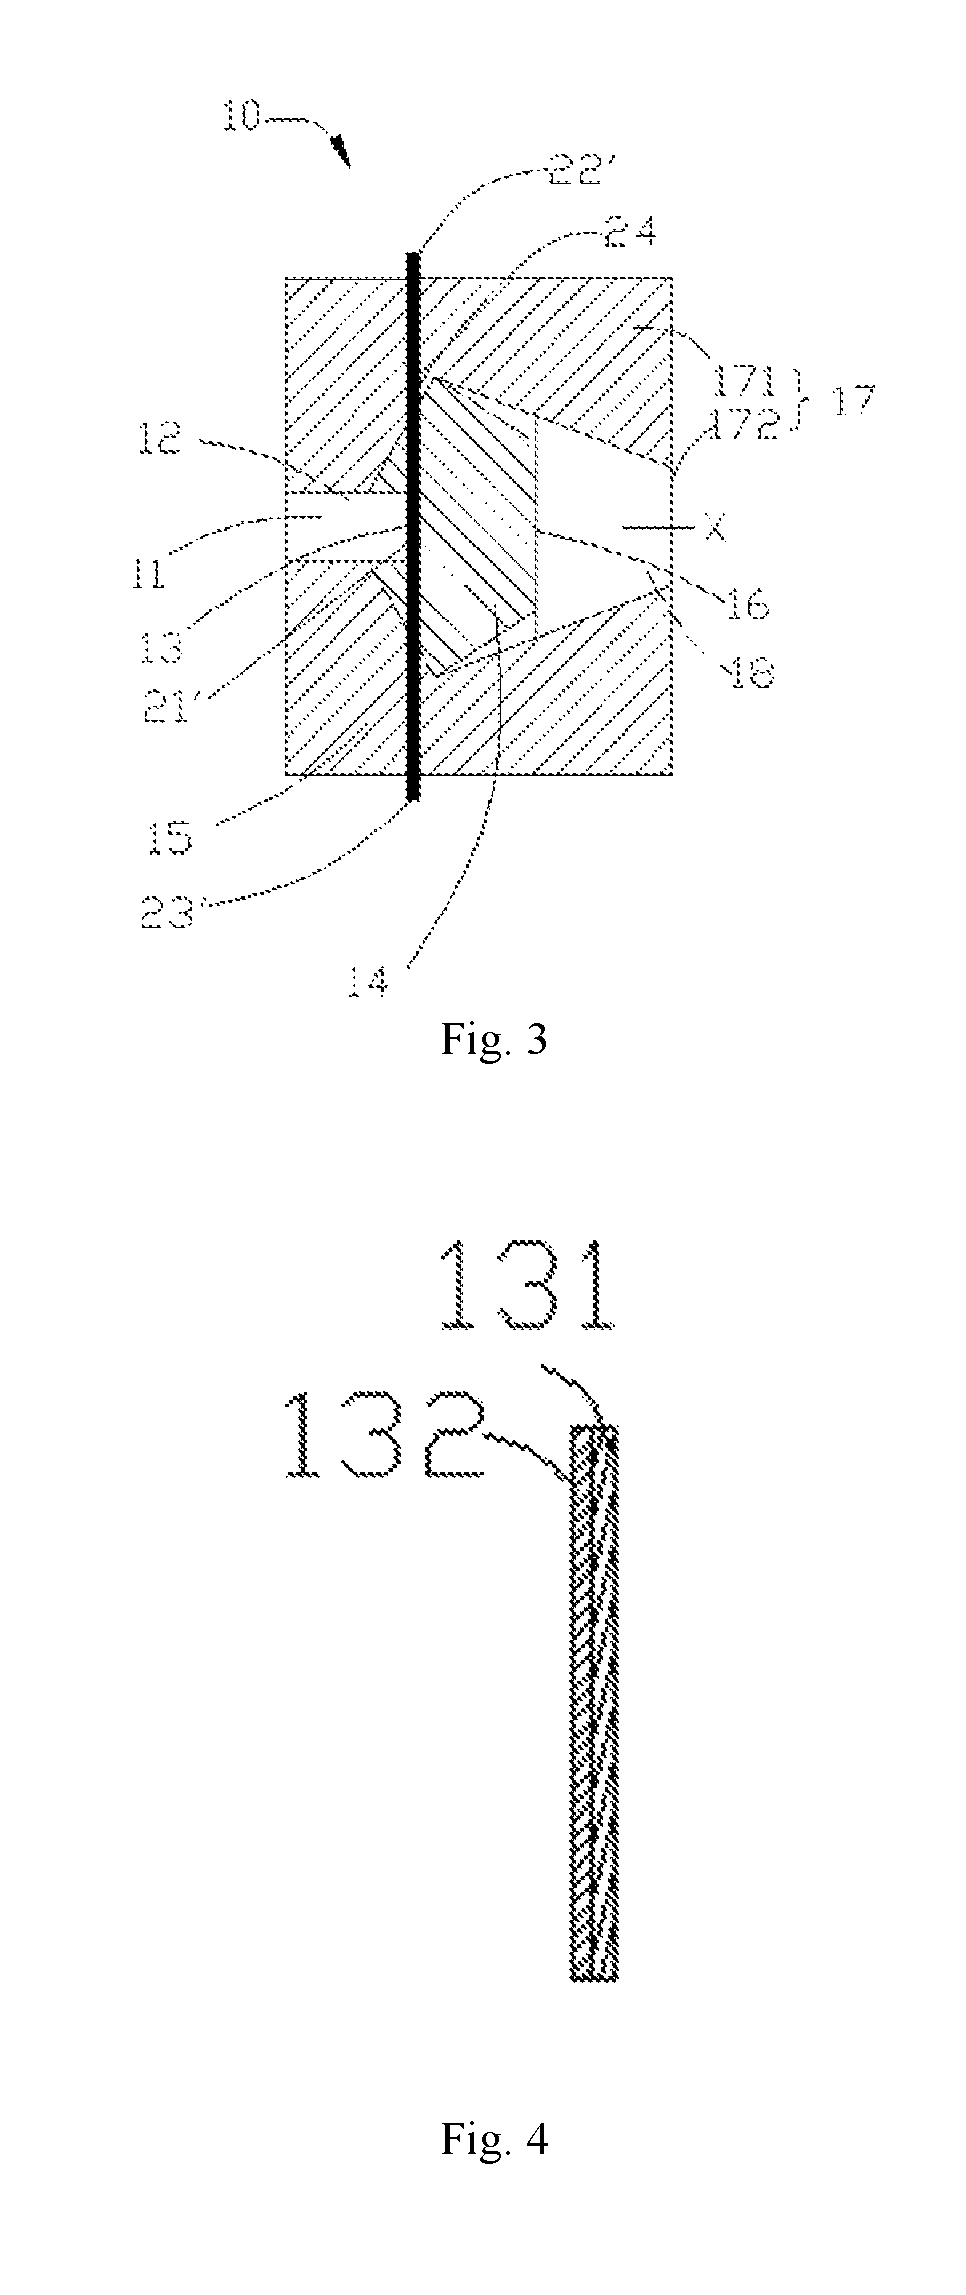 Beam shaping assembly for neutron capture therapy